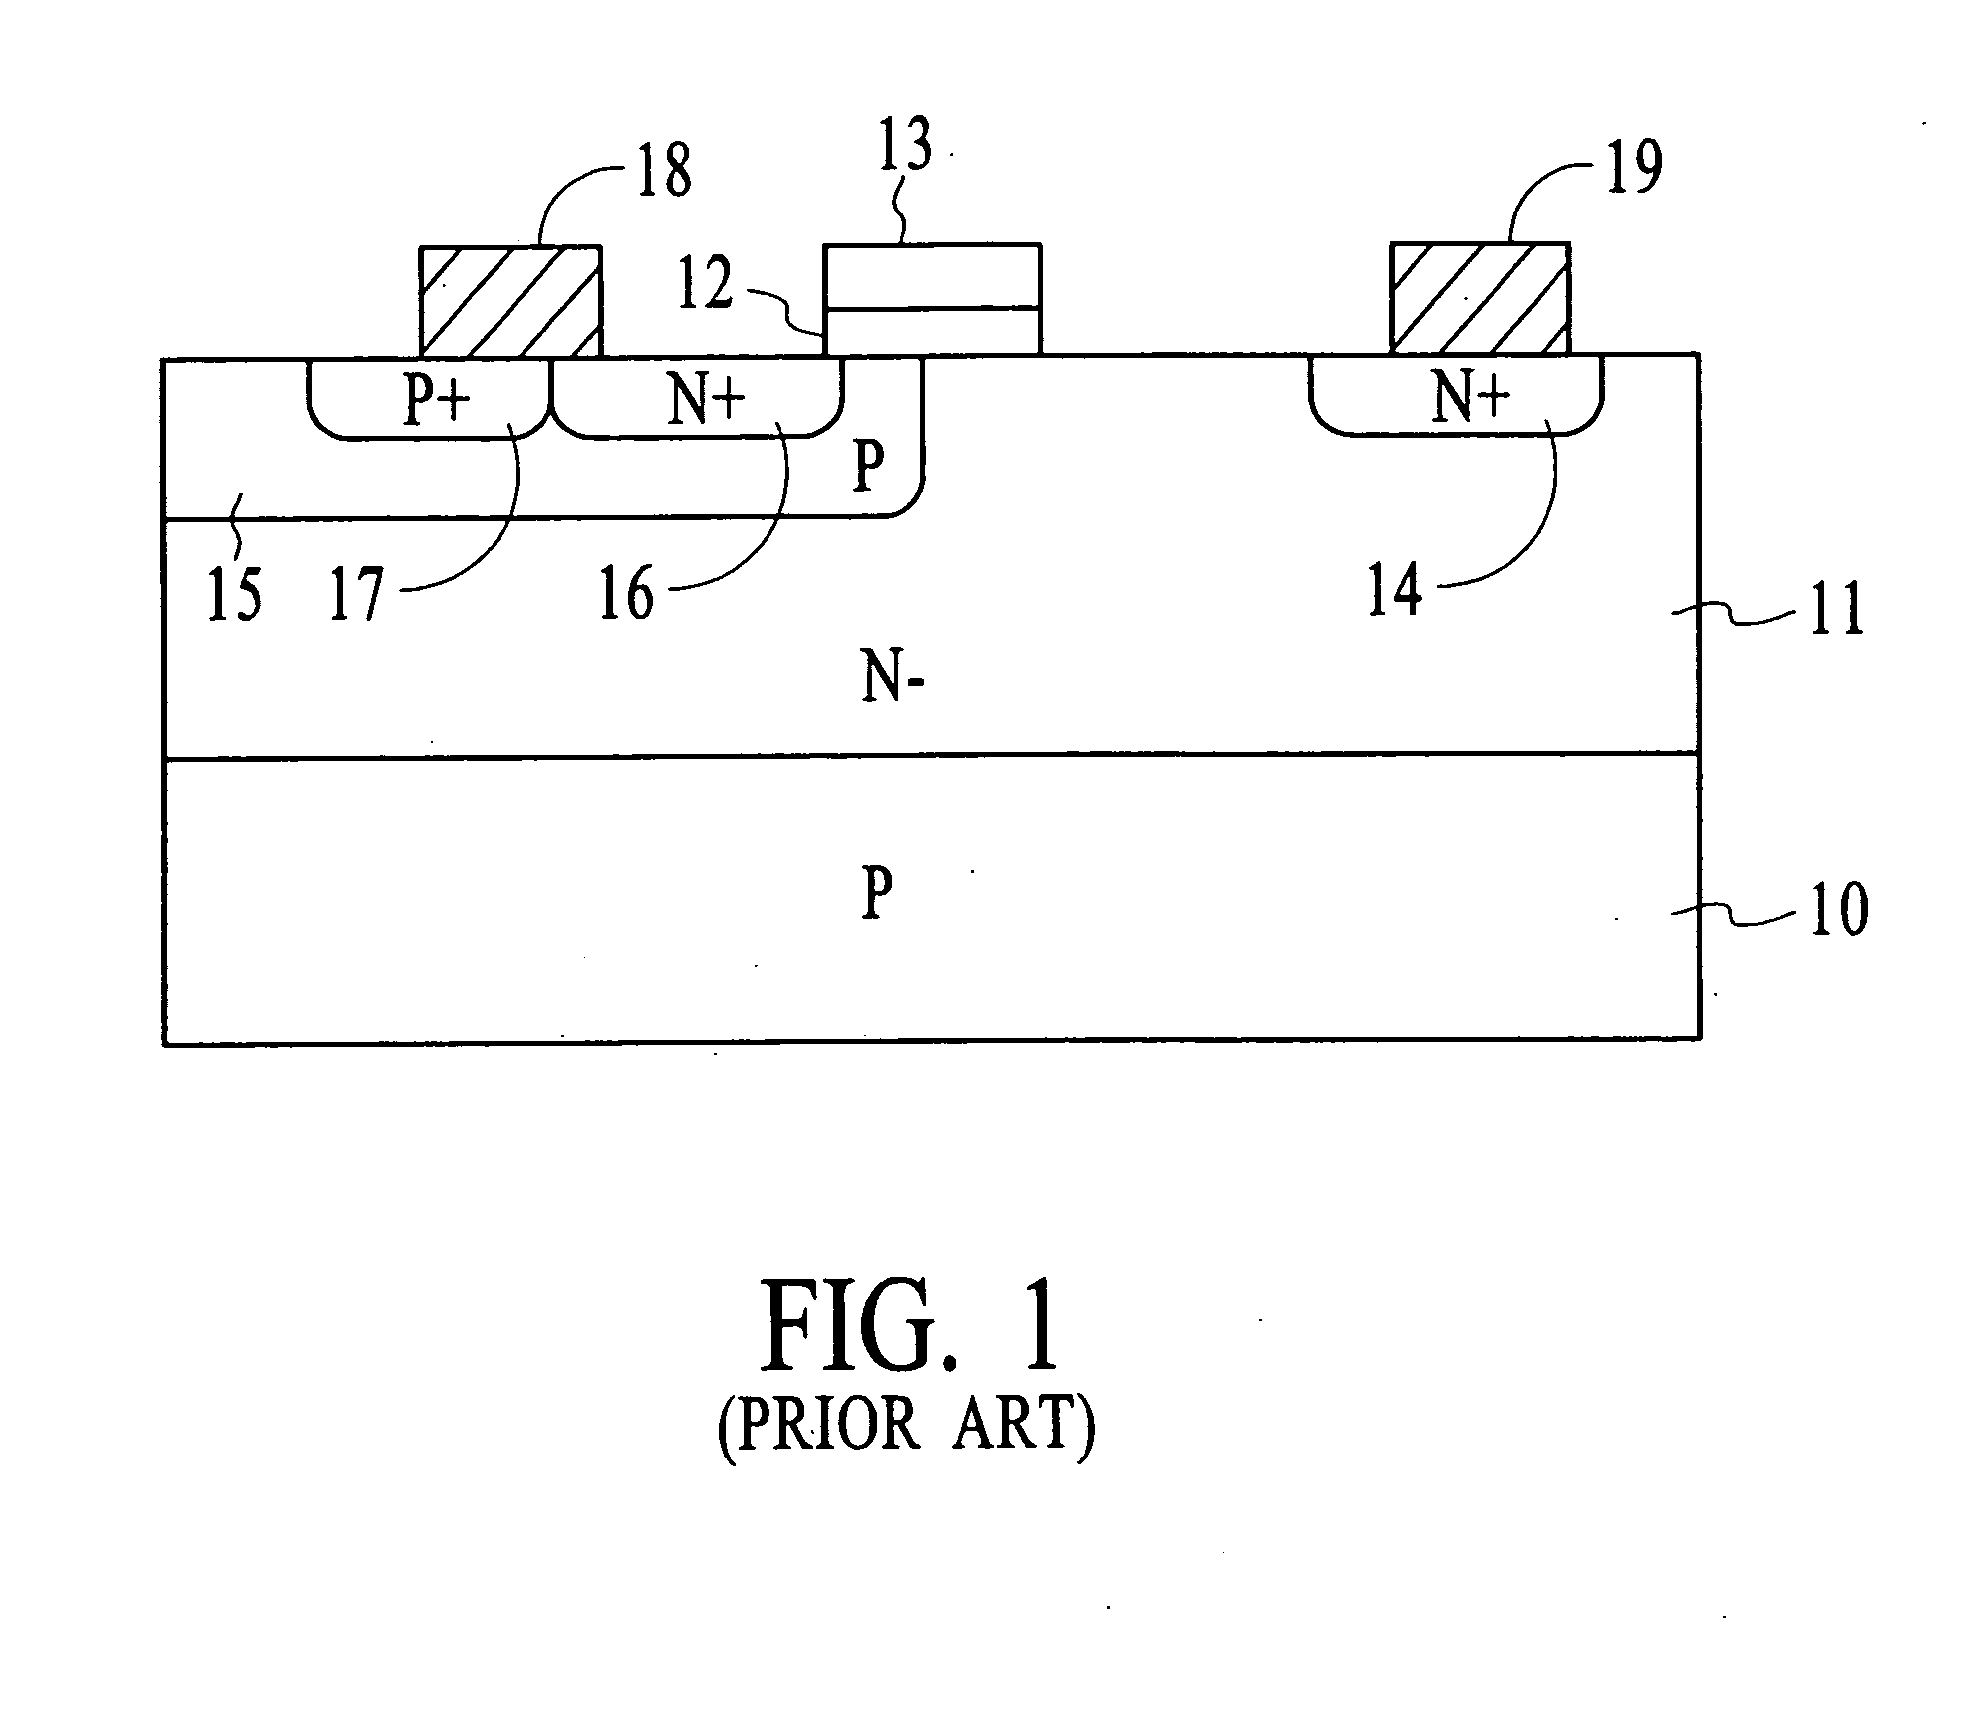 Lateral double-diffused metal oxide semiconductor (LDMOS) device with an enhanced drift region that has an improved Ron area product